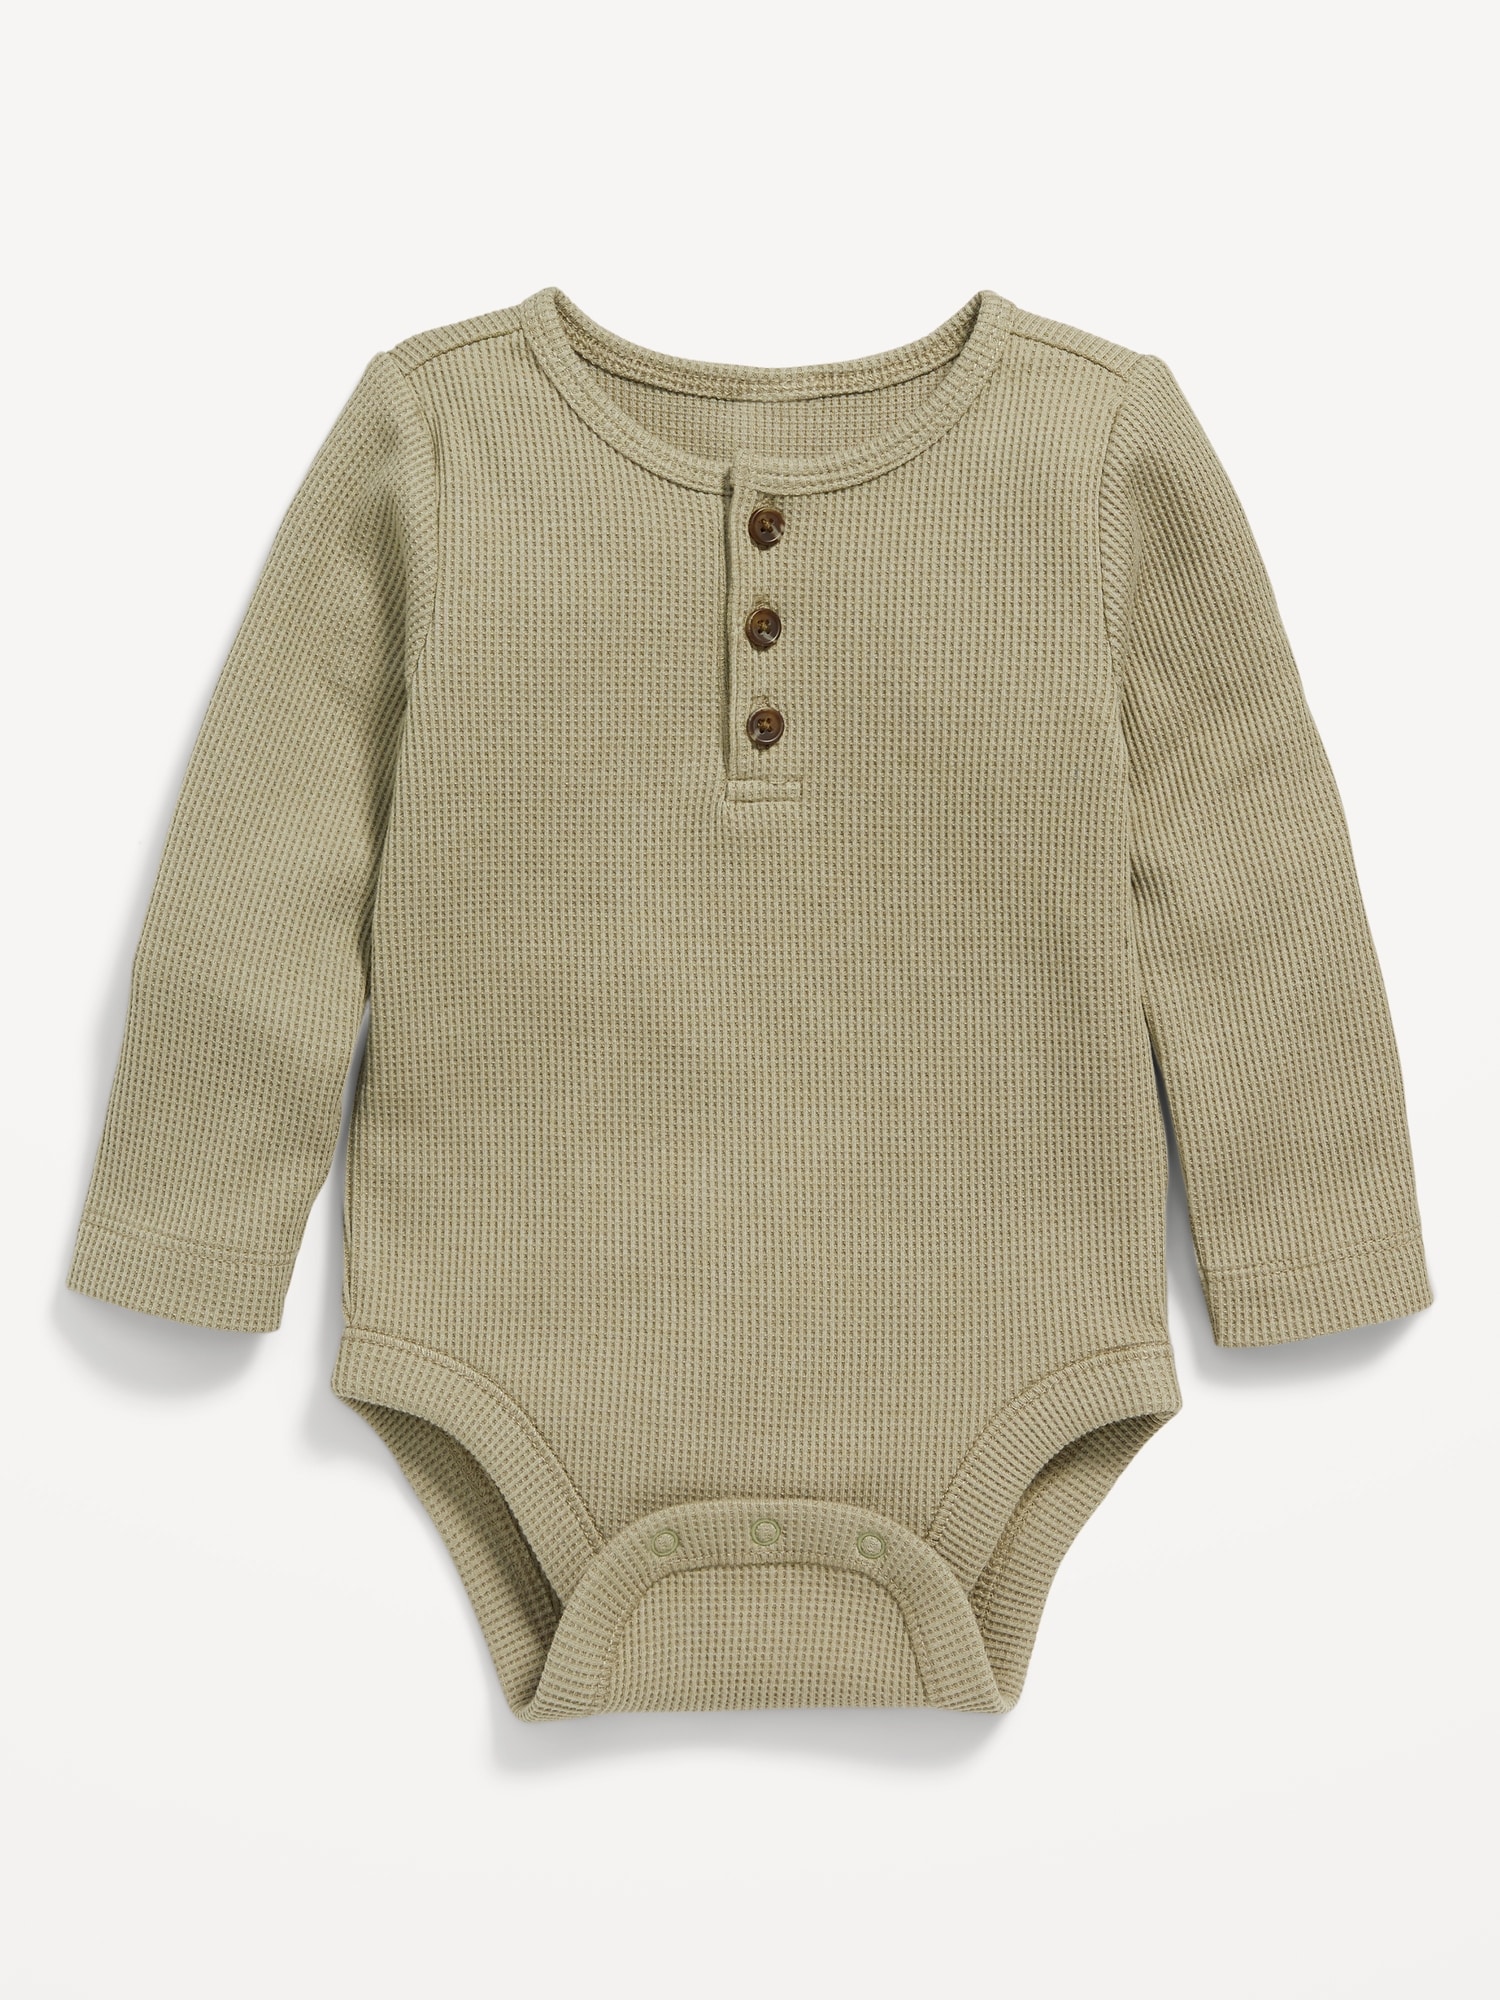 Unisex Long-Sleeve Thermal-Knit Henley Bodysuit for Baby